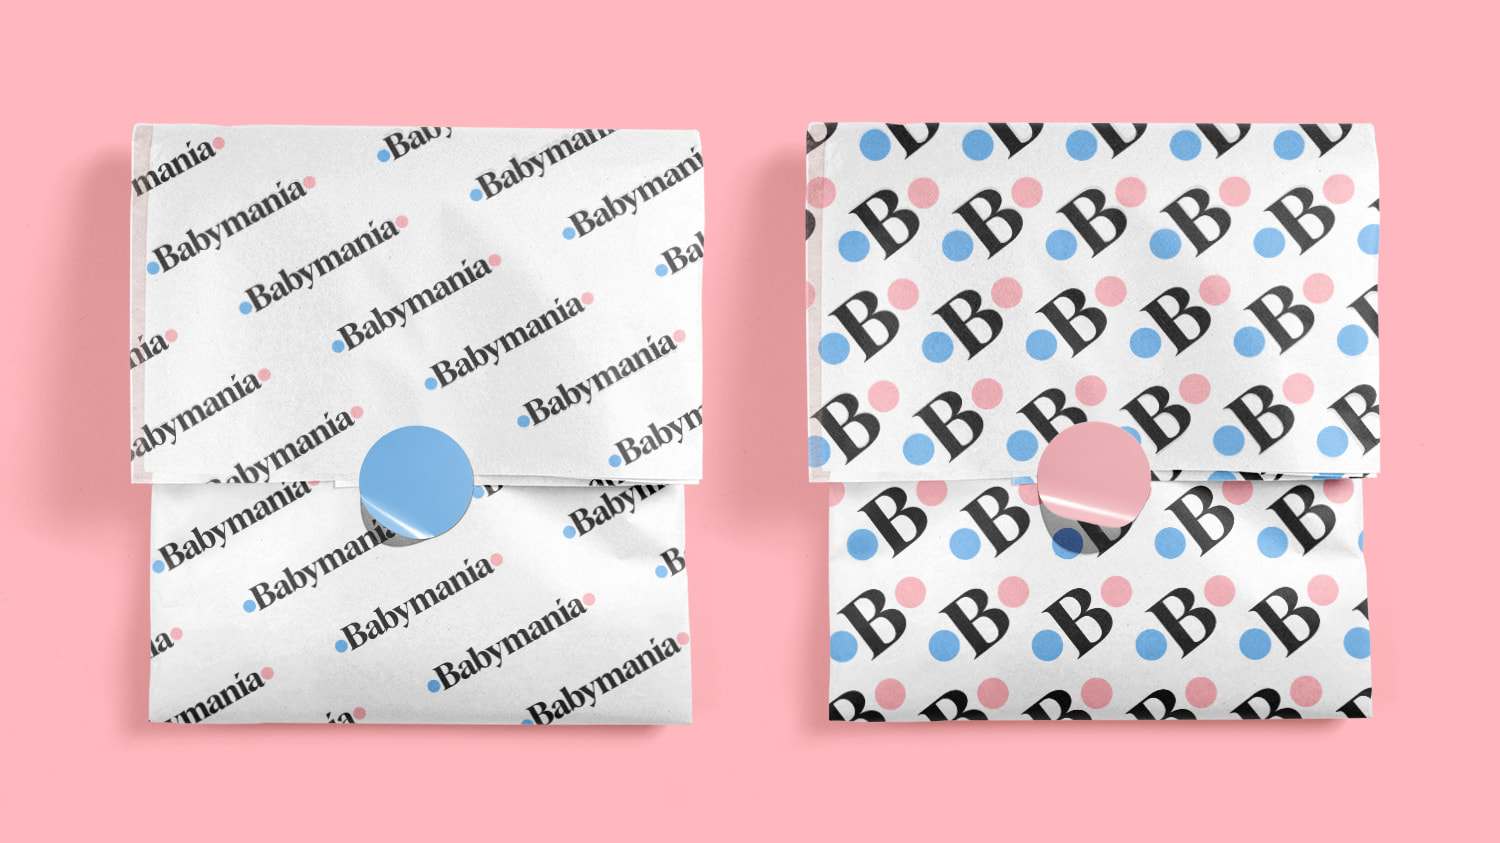 Two wrapping paper designs with Babymania logo patterns printed across paper